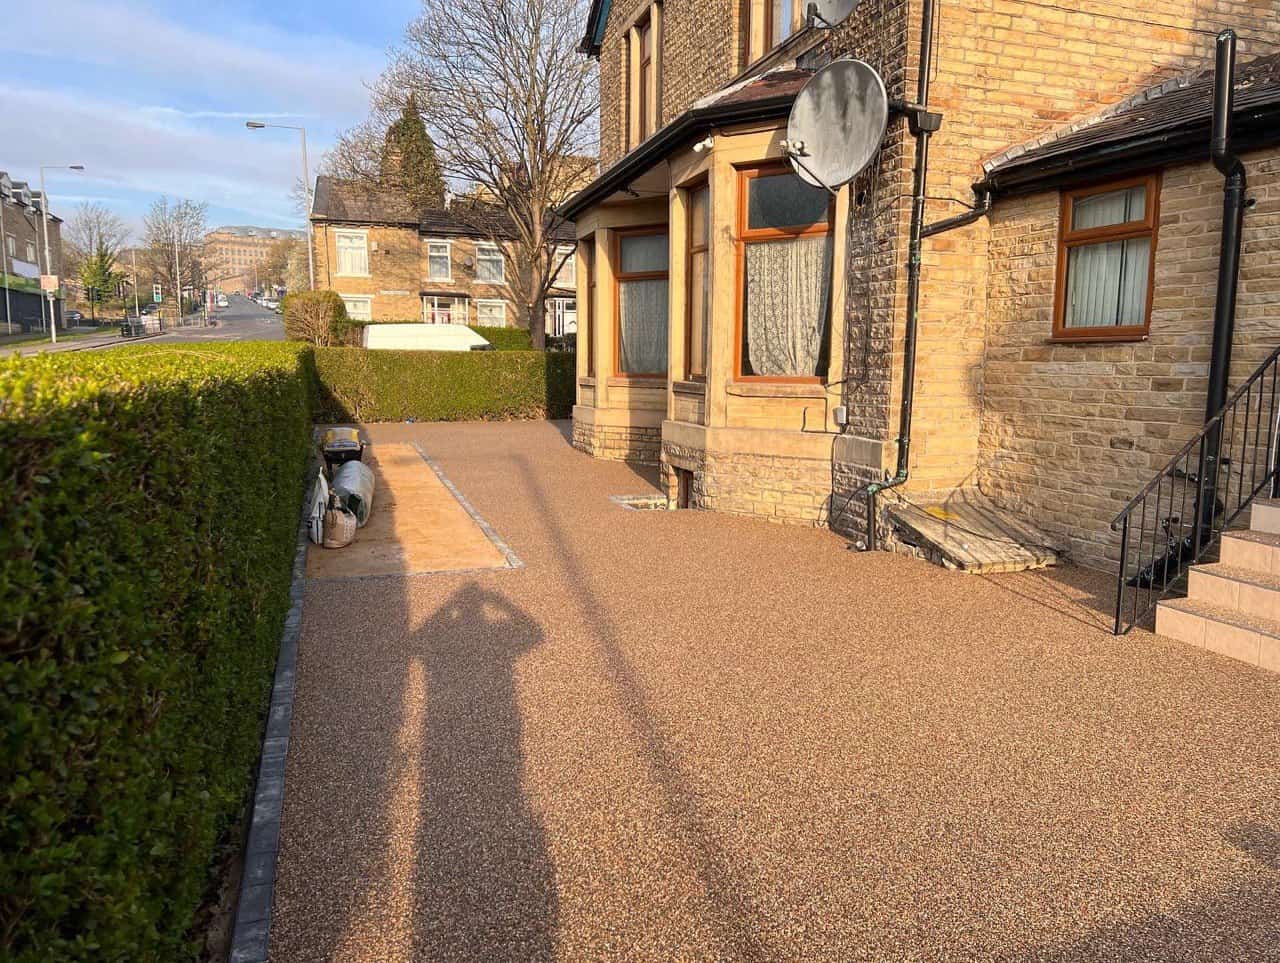 This is a photo of a resin patio installed in Doncaster by Doncaster Resin Driveways